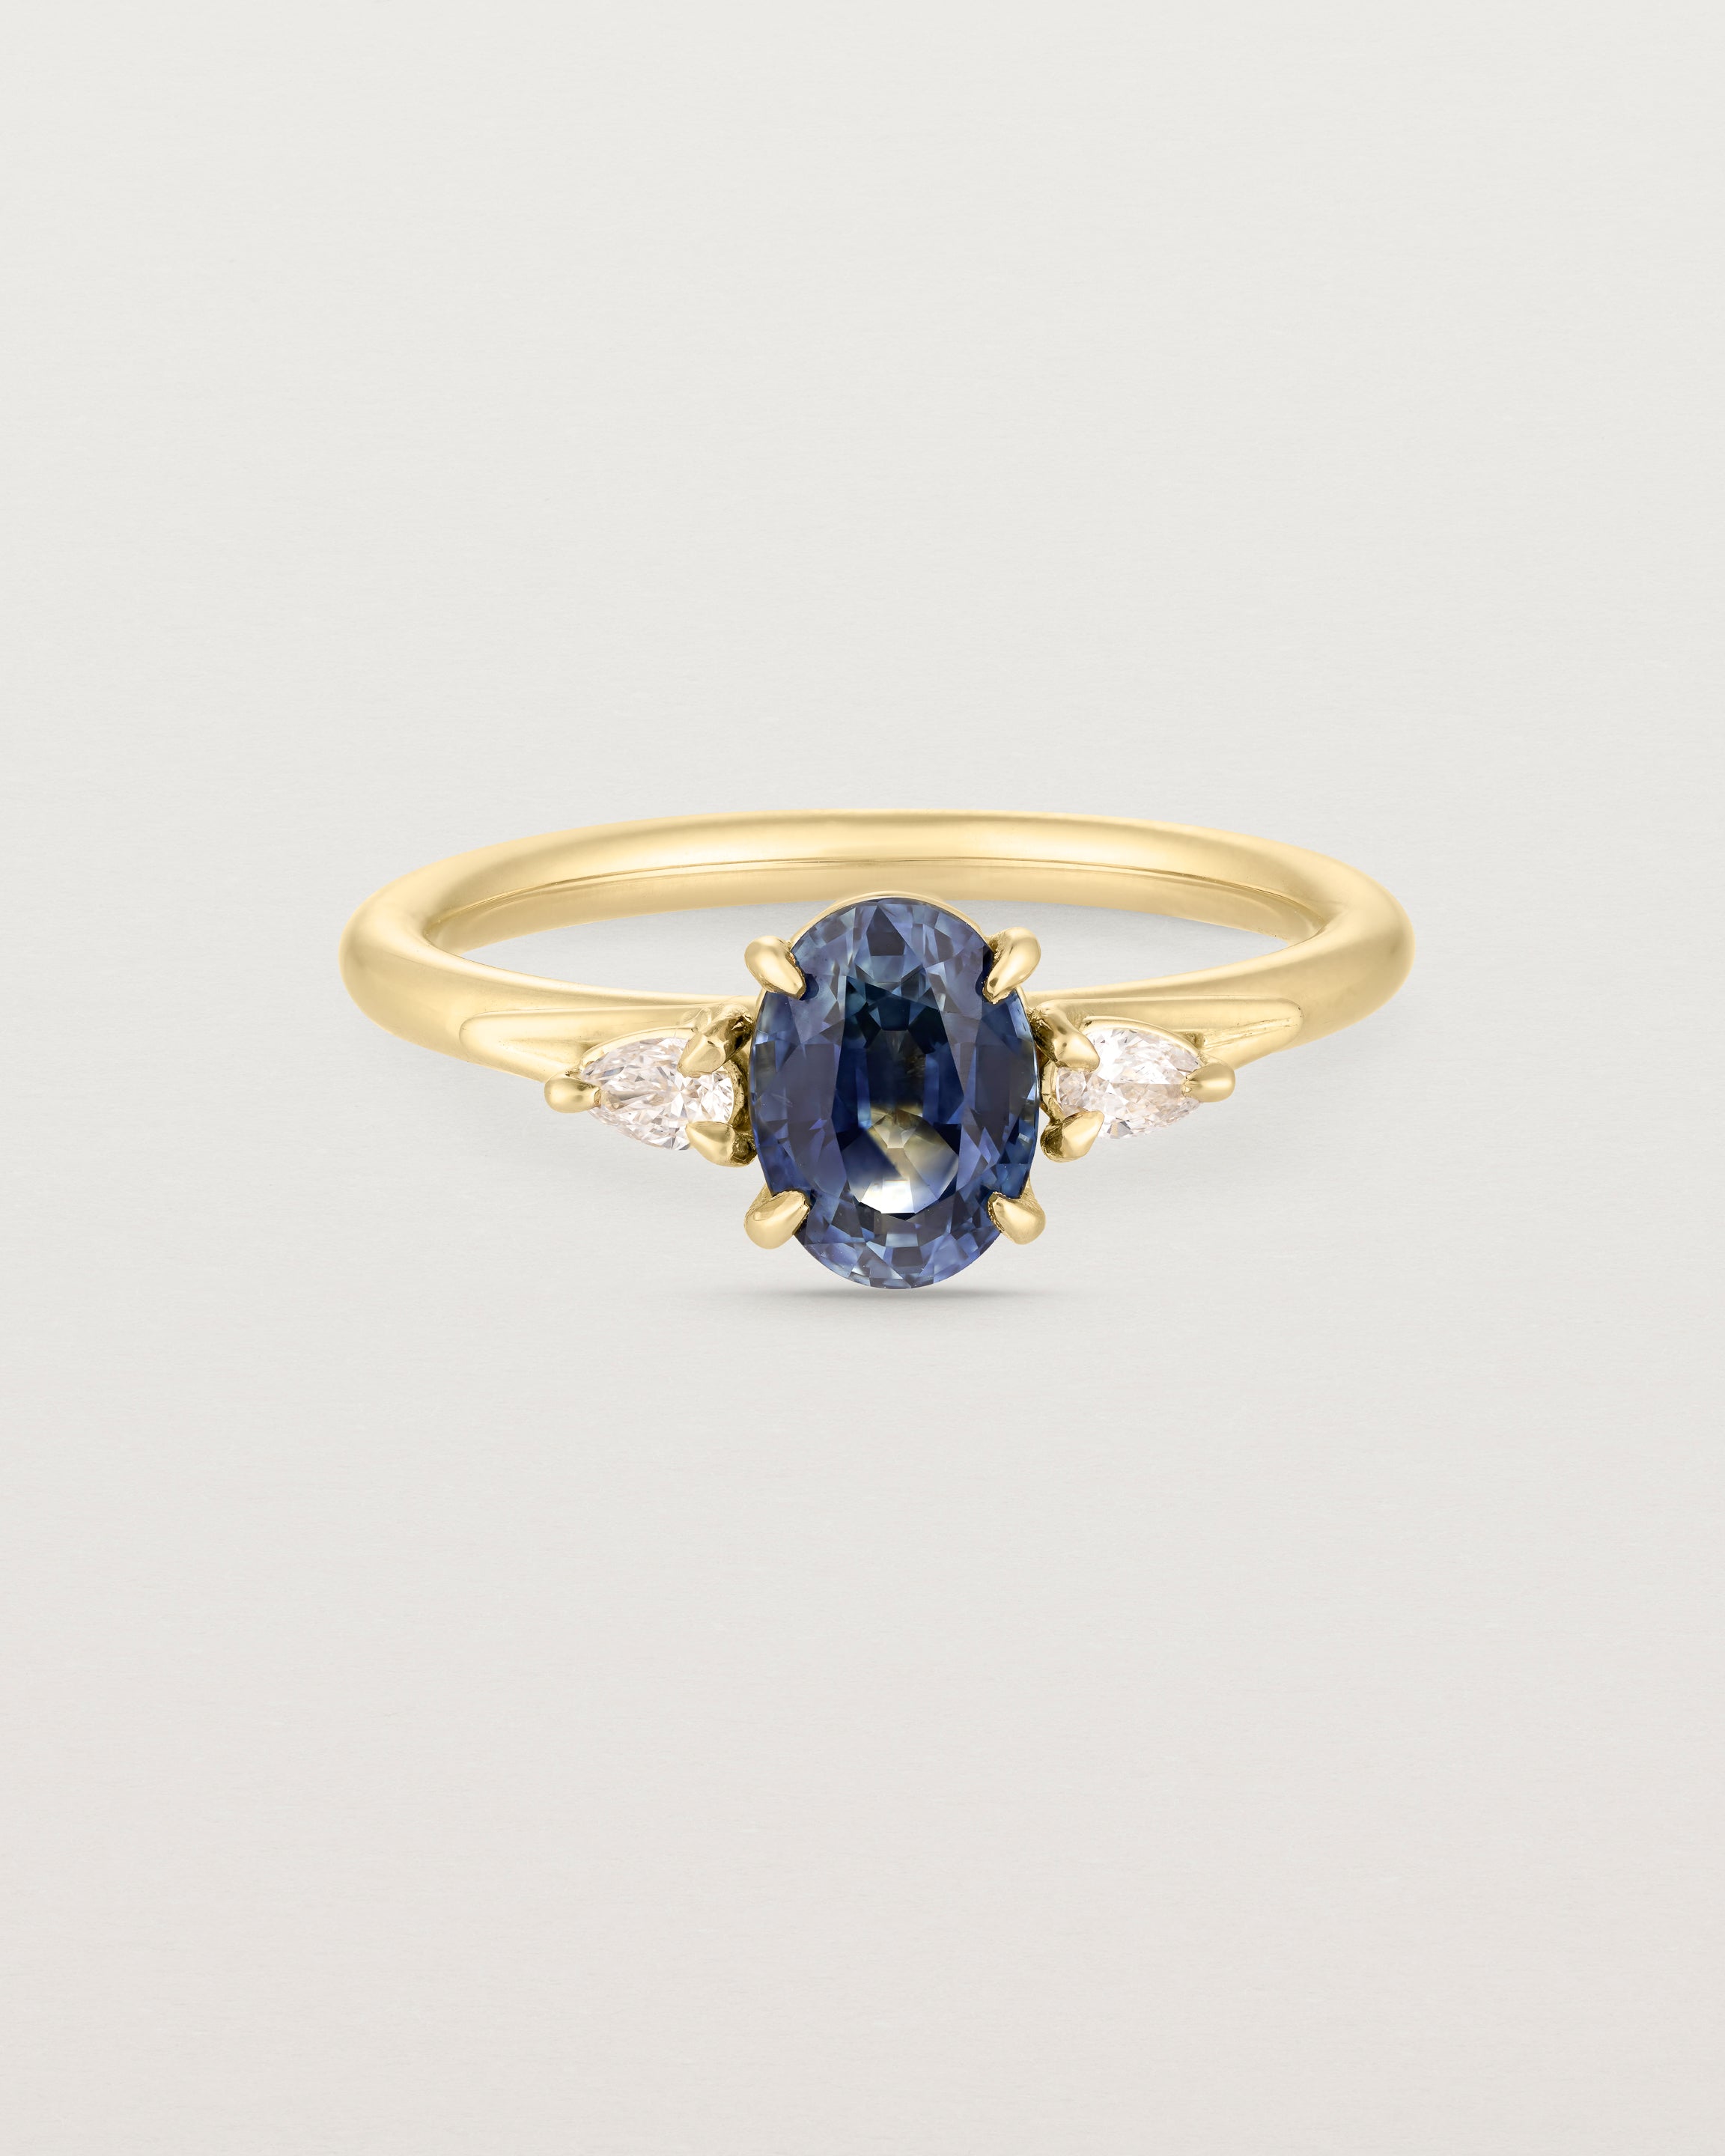 Front image of blue sapphire trio ring with white diamonds.